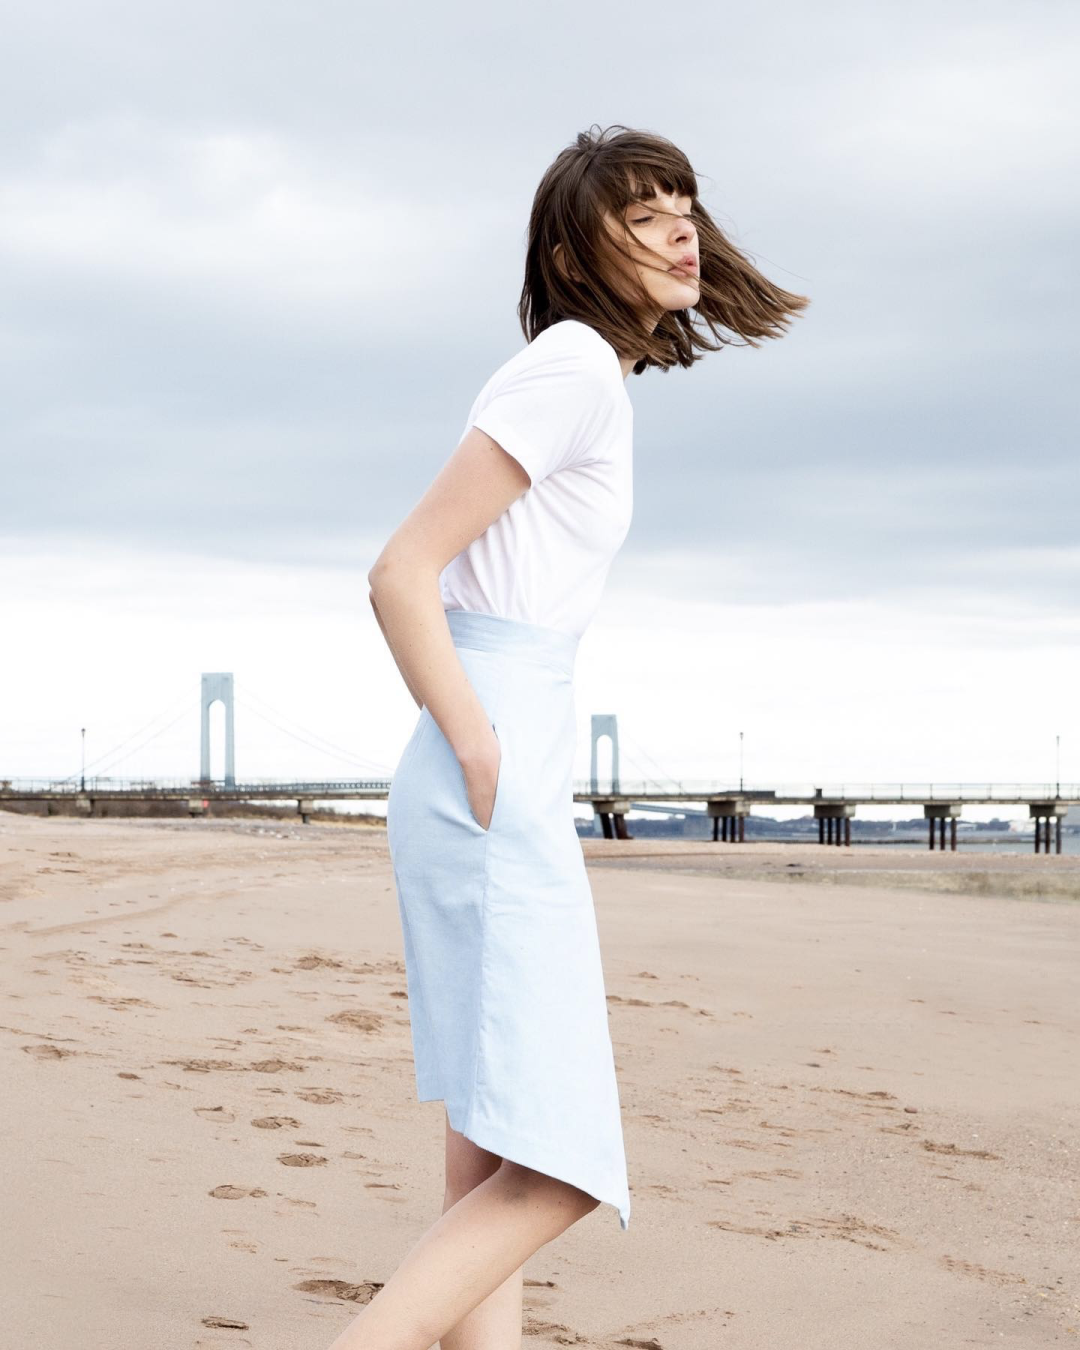 A woman with short dark brown hair wearing a blue skirt and white t-shirt stood on a beach